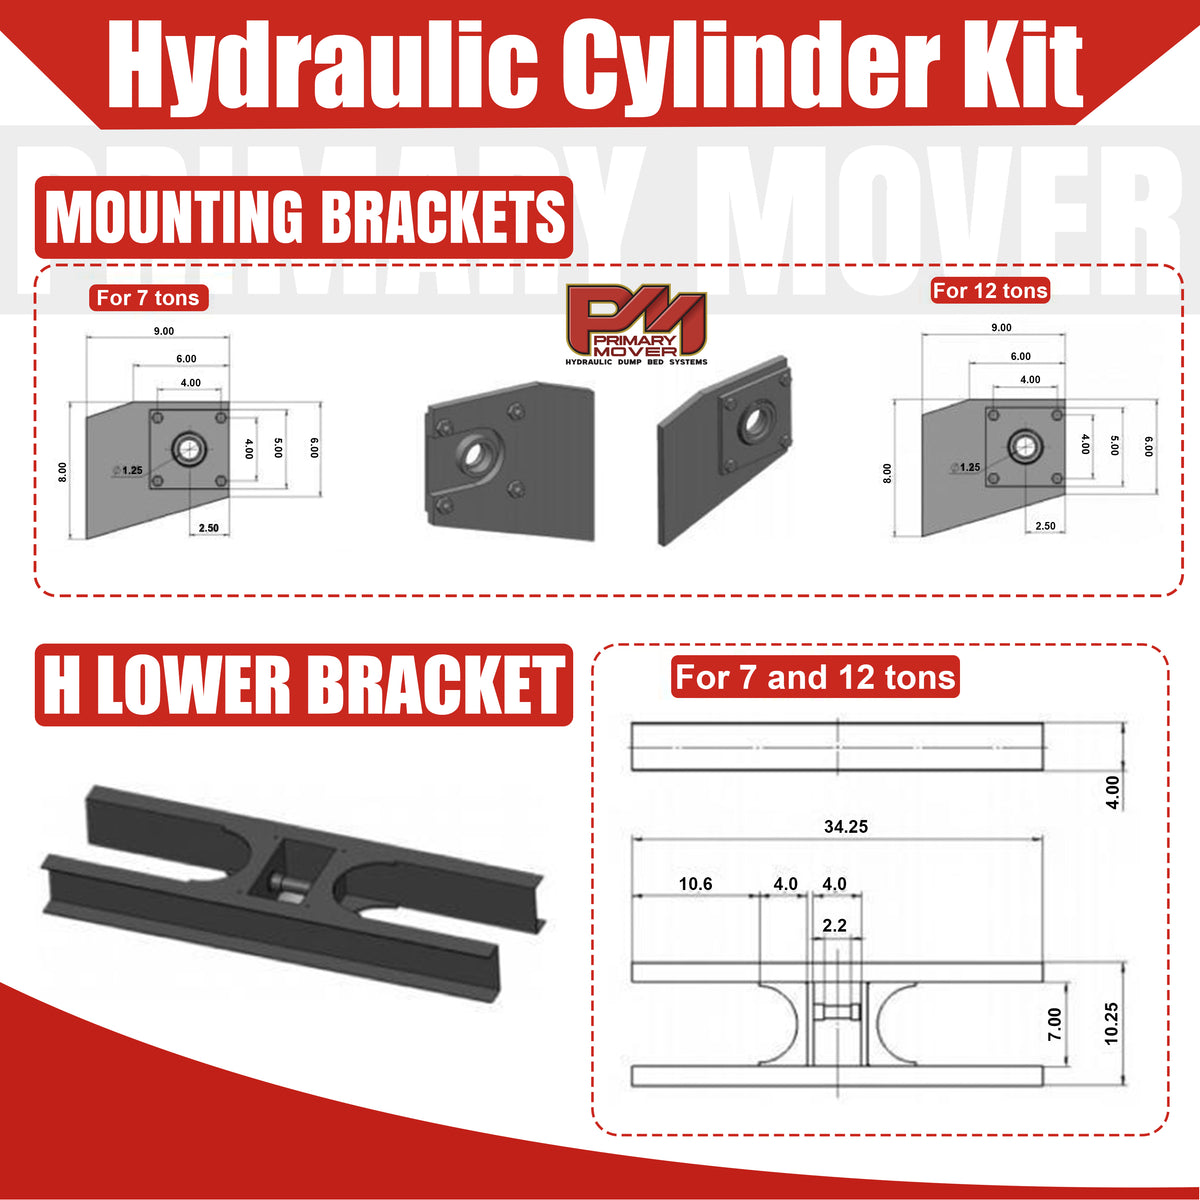 Alt text: Diagram of the Telescopic Dump Trailer Cylinder Kit, featuring a 120 stroke for lifting up to 30 tons, including mounting brackets and hydraulic components.